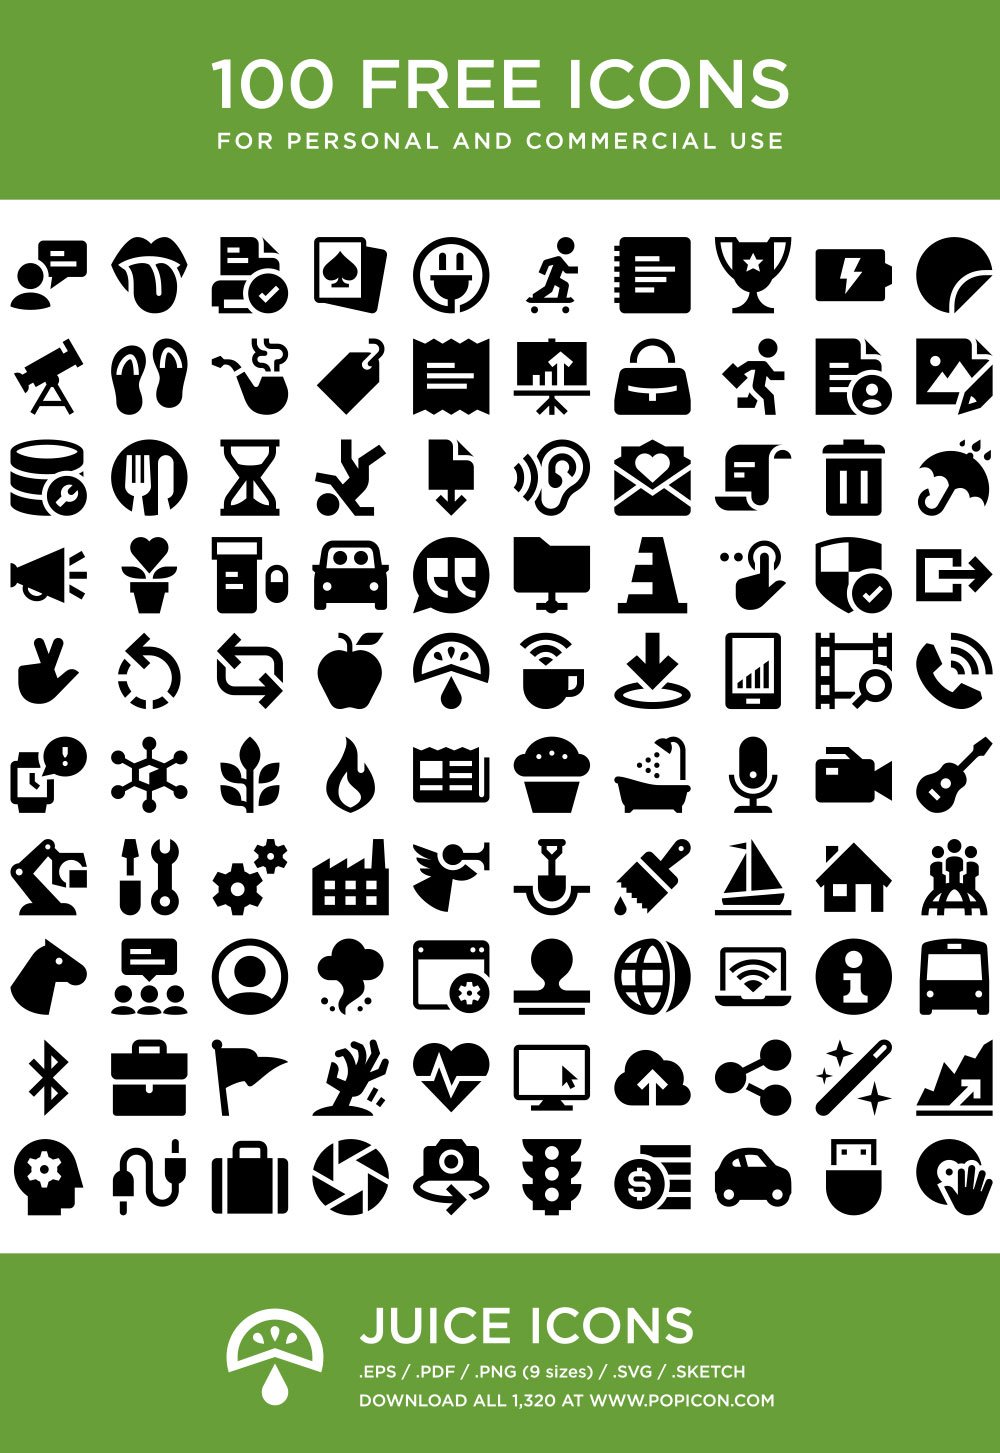 copyright free icons commercial use